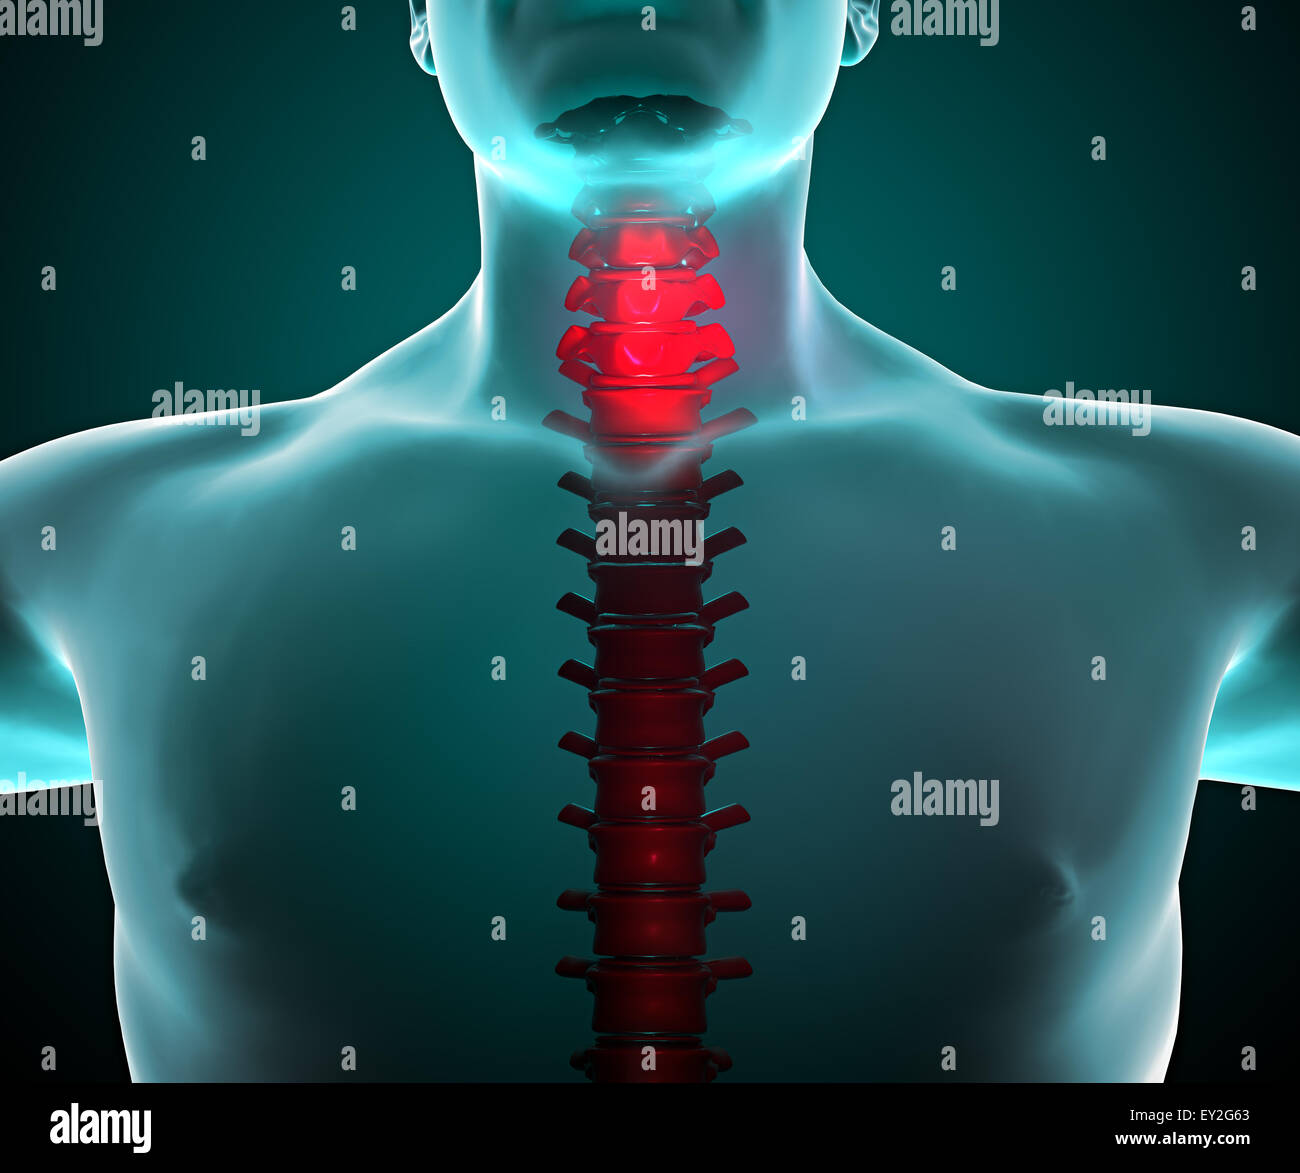 Human body seen from the front with a x-ray view of the neck and spine Stock Photo